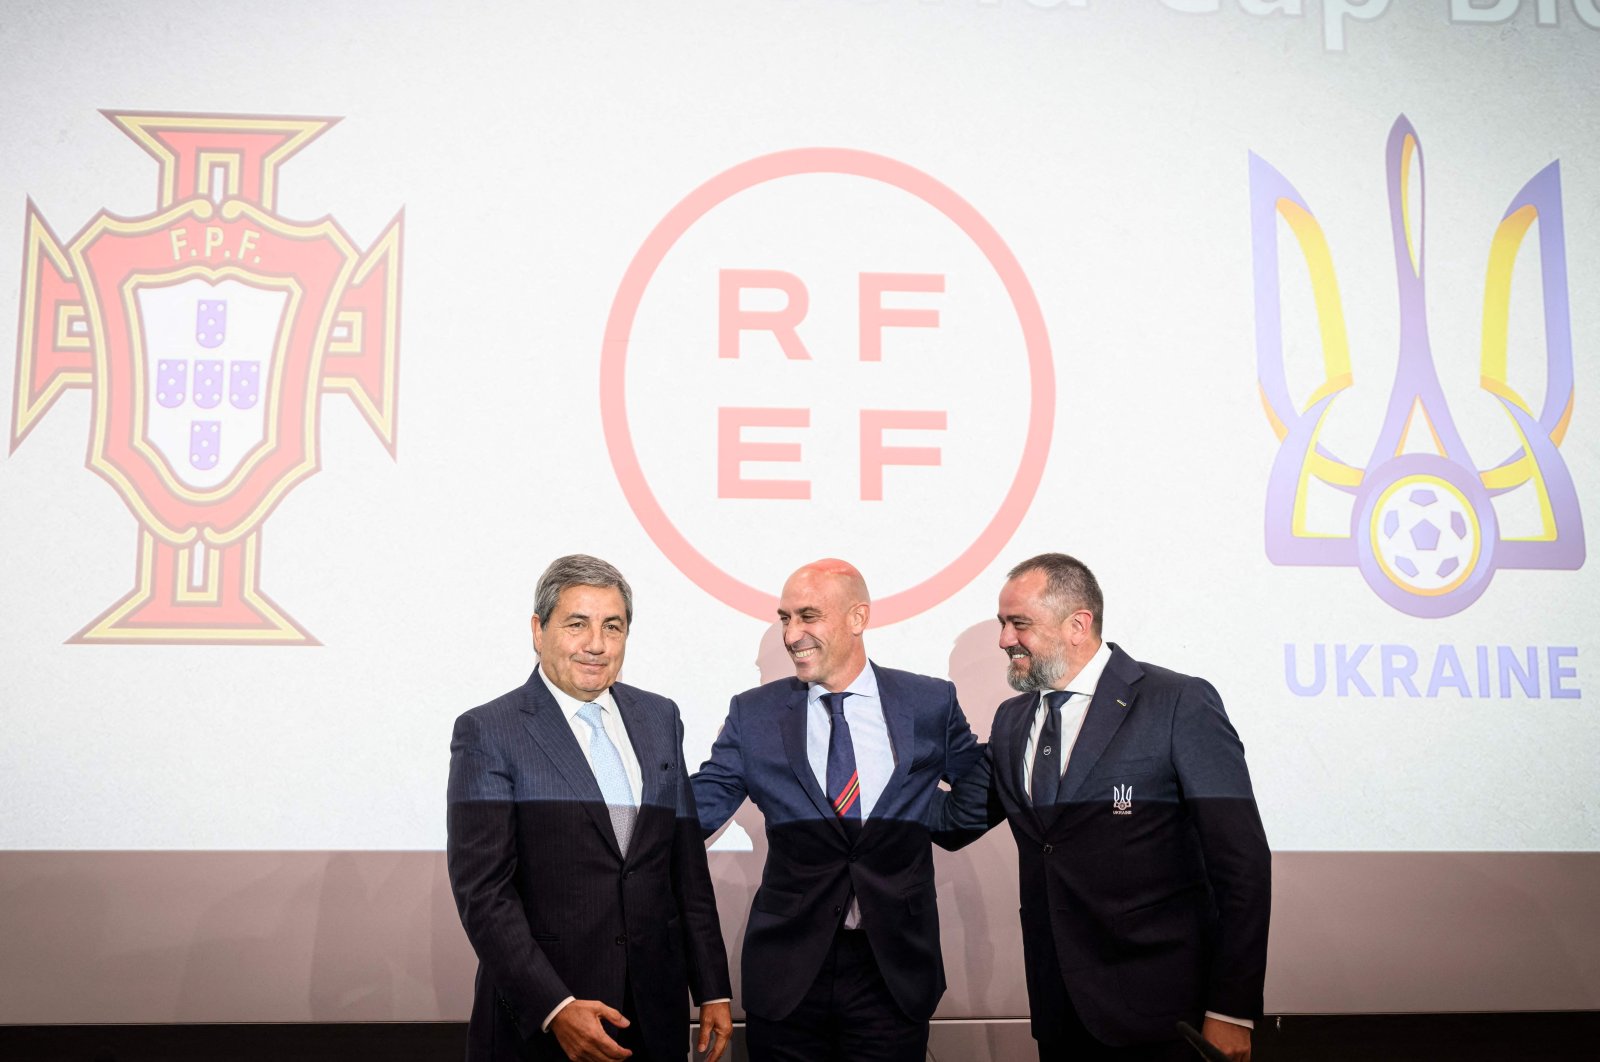 Fernando Soares Gomes da Silva (L),  Luis Rubiales (C), and  Andriy Pavelko pose during a press conference announcing Spain, Portugal and Ukraine bid for the 2030 World Cup at the UEFA headquarters. Nyon, Oct. 5, 2022. (AFP Photo)